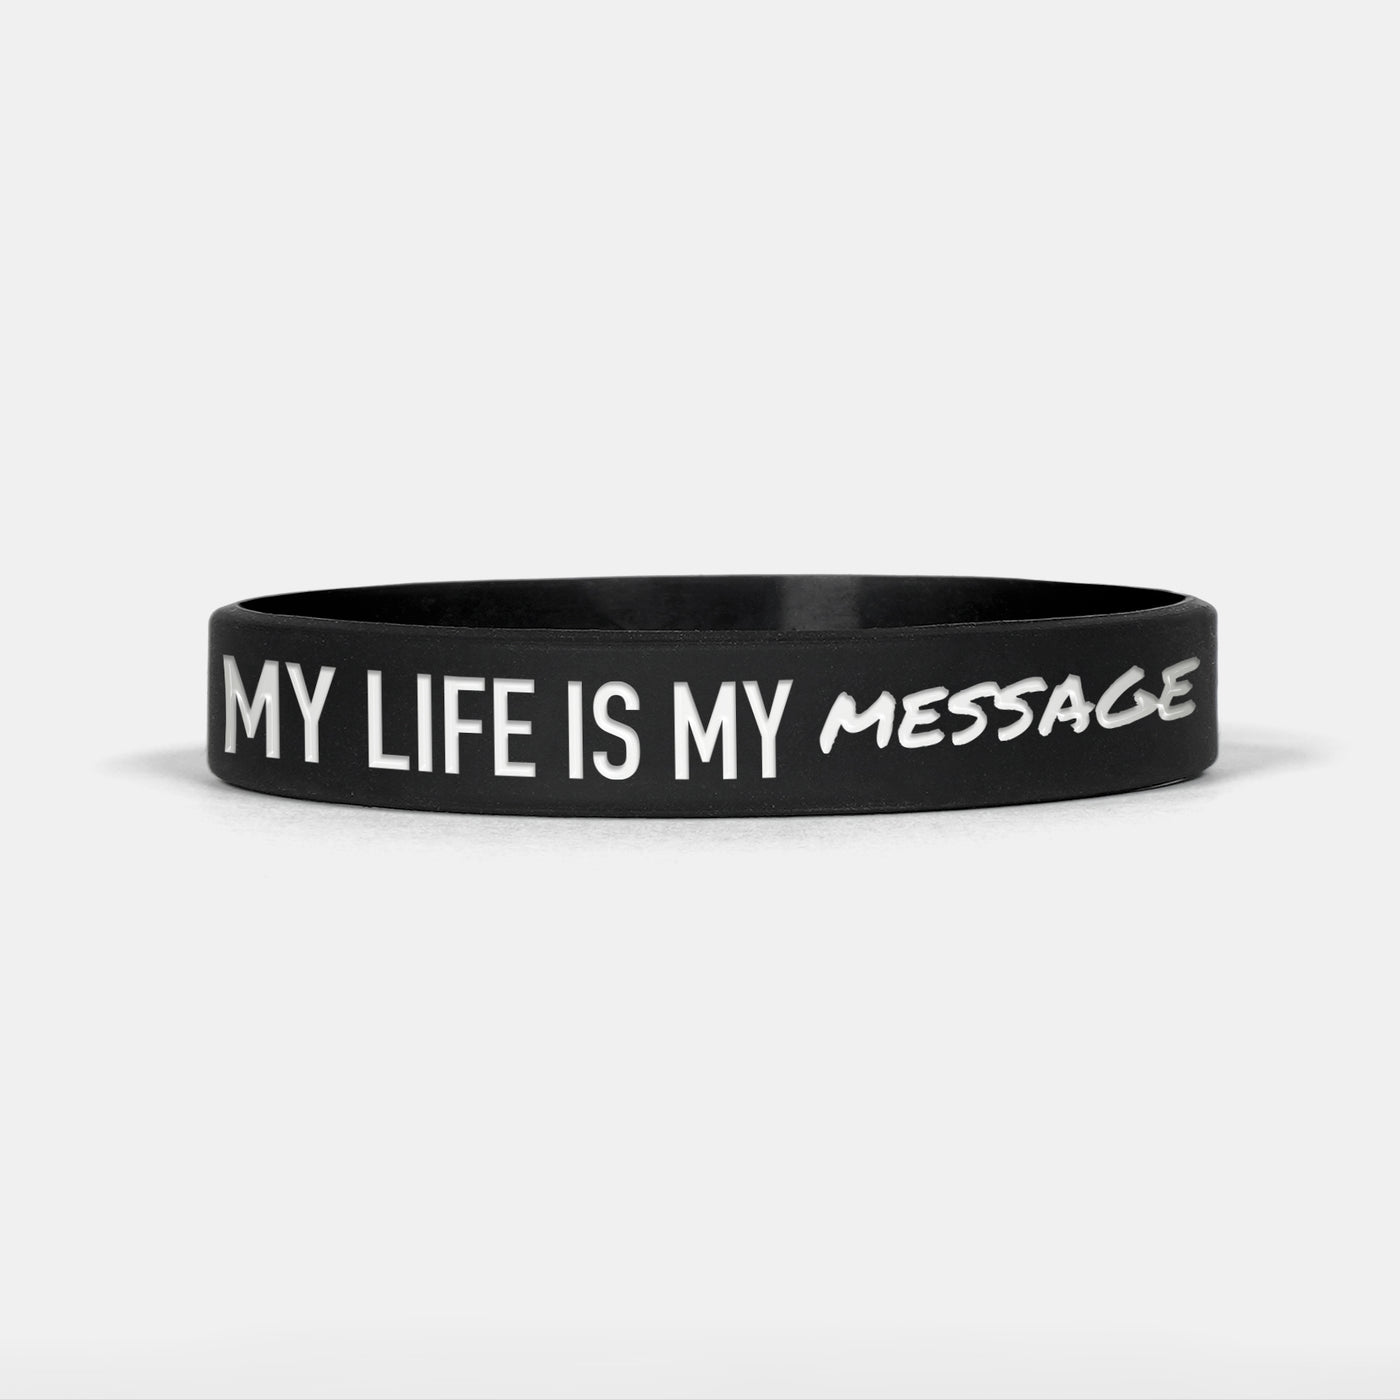 My Life Is My Message. Motivational Wristband